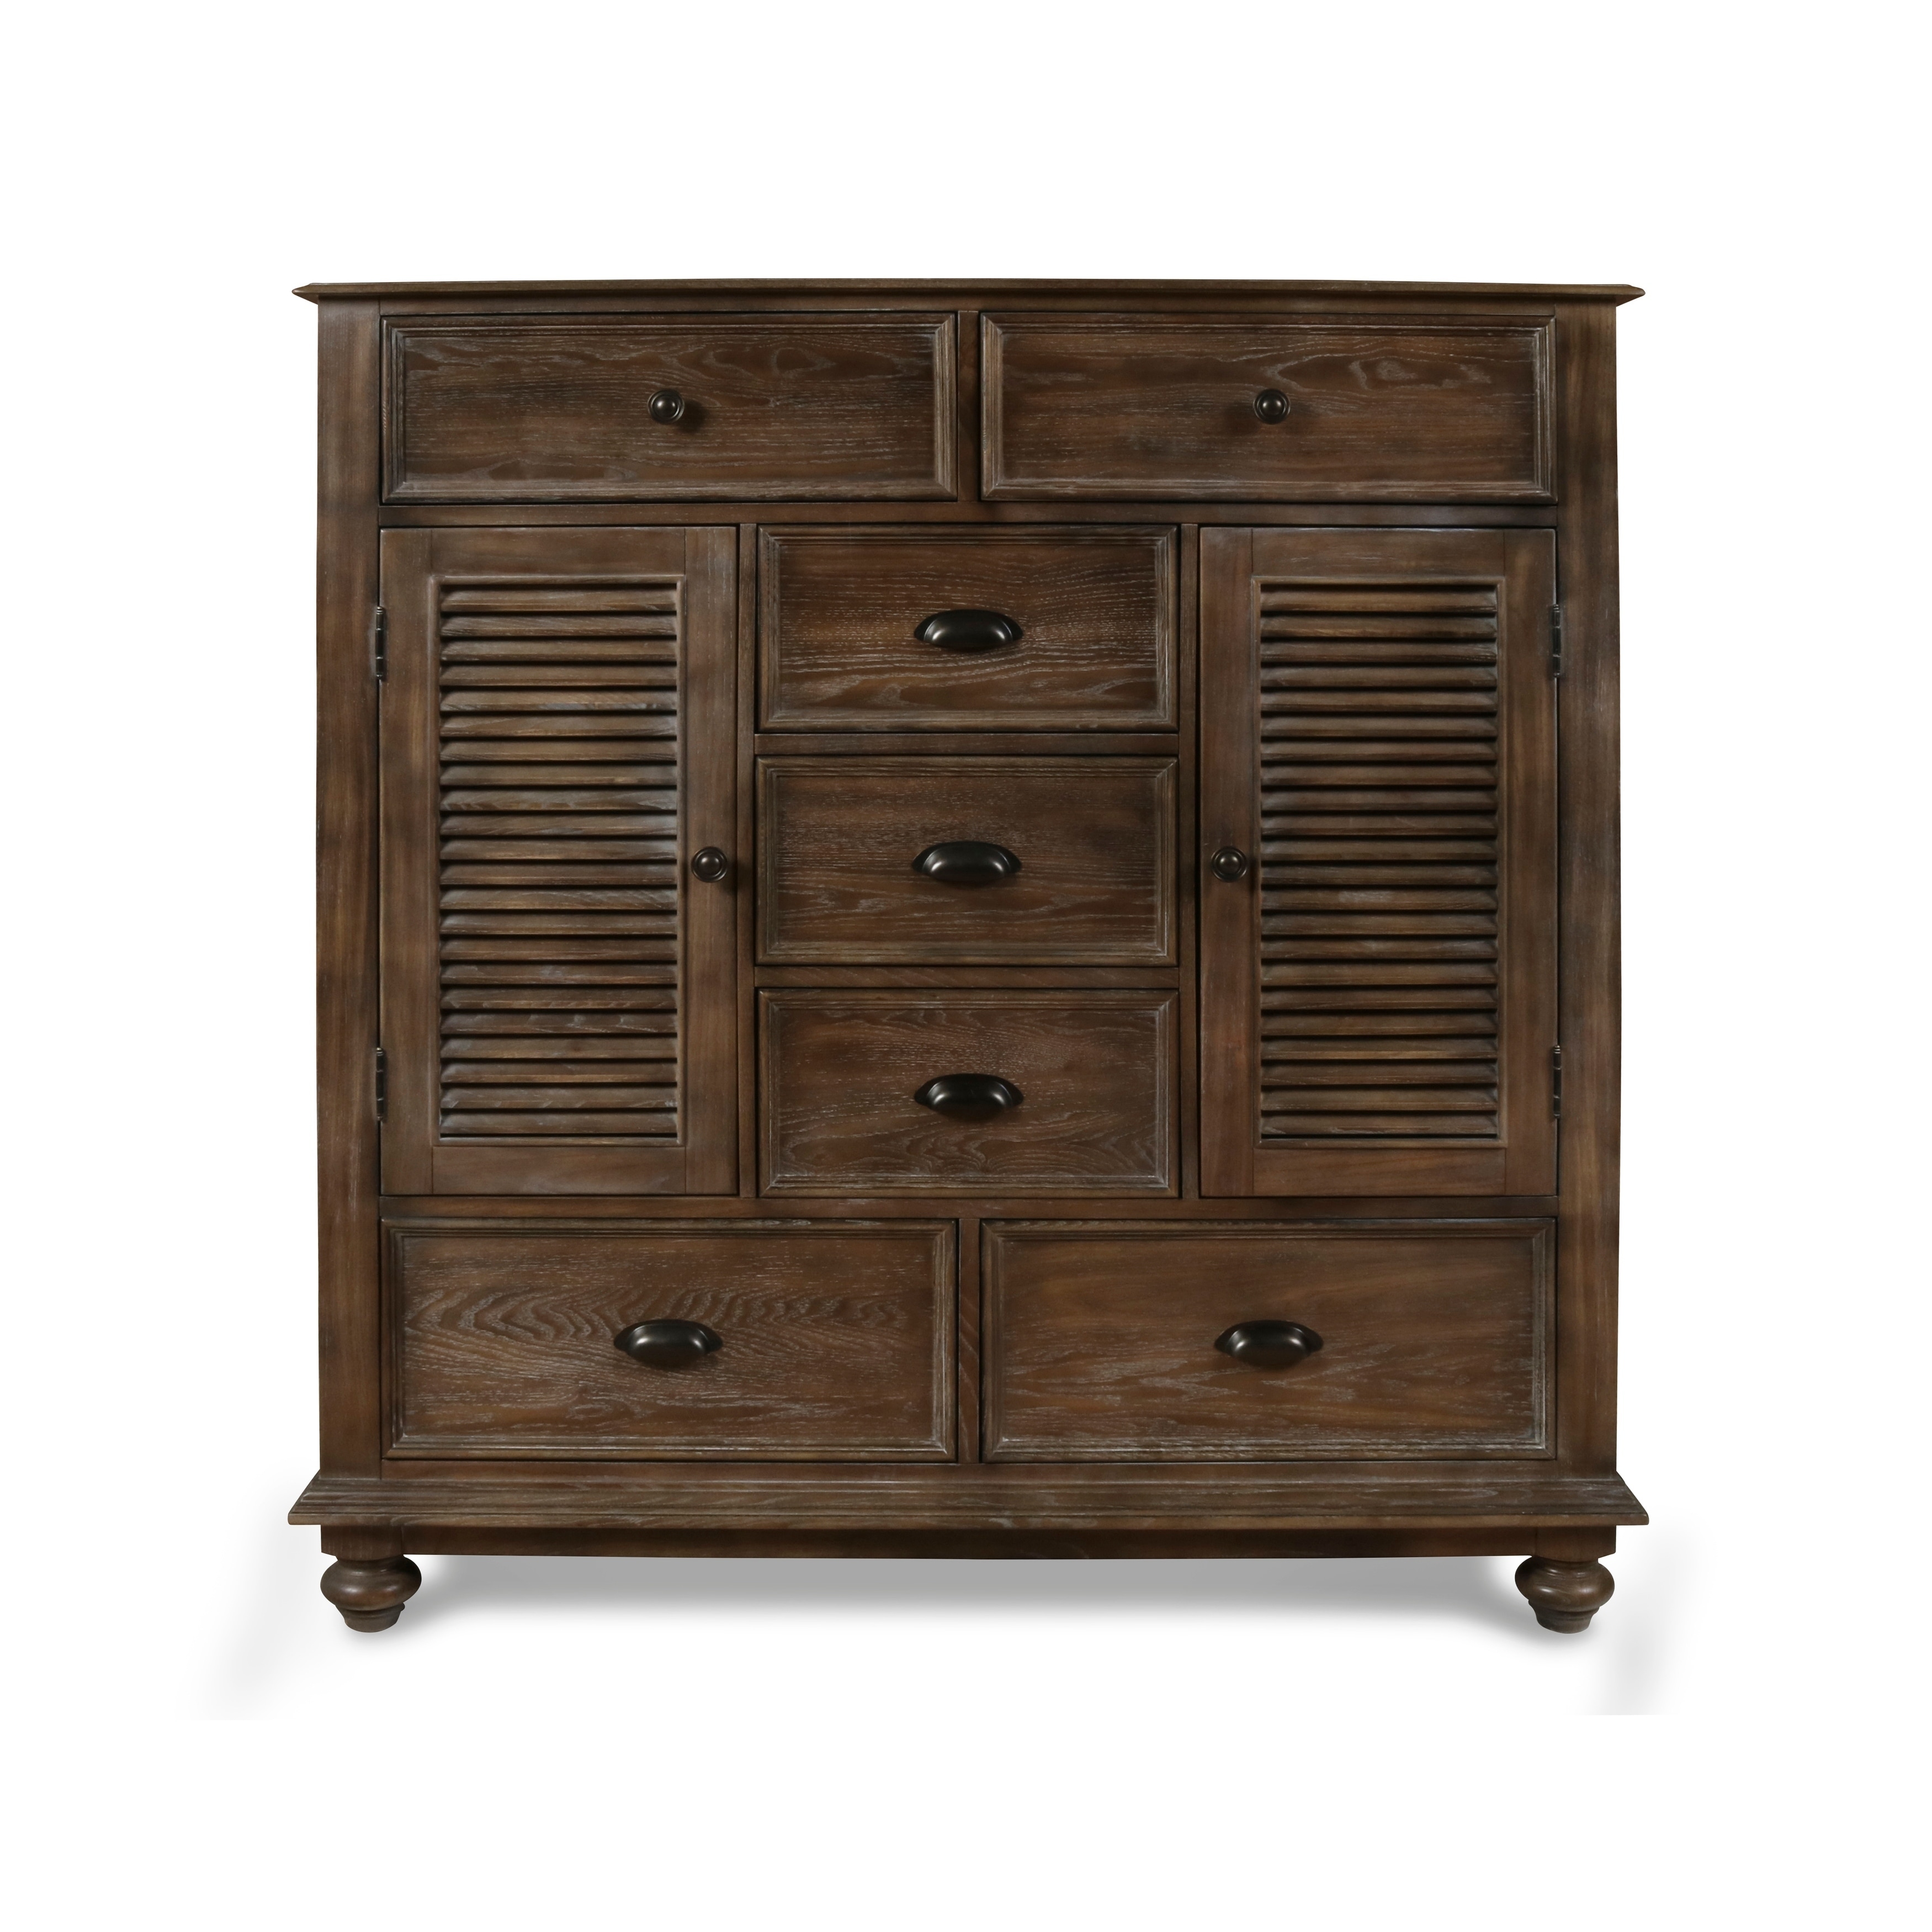 Shop Lakeport Pewter 2 Door And 7 Drawer Mule Chest On Sale